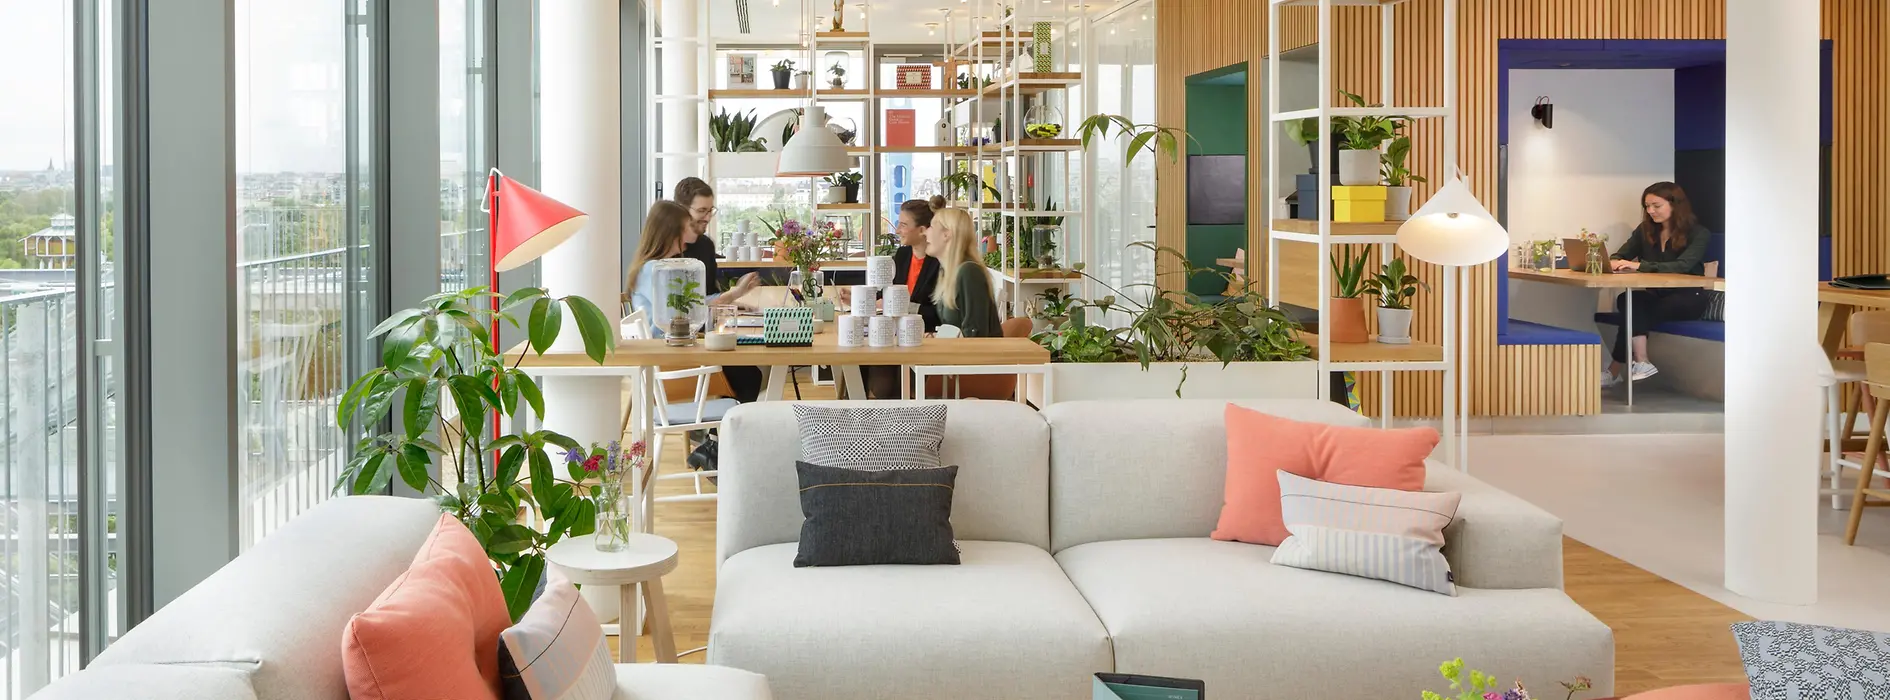 Coworking Space - The Living Room